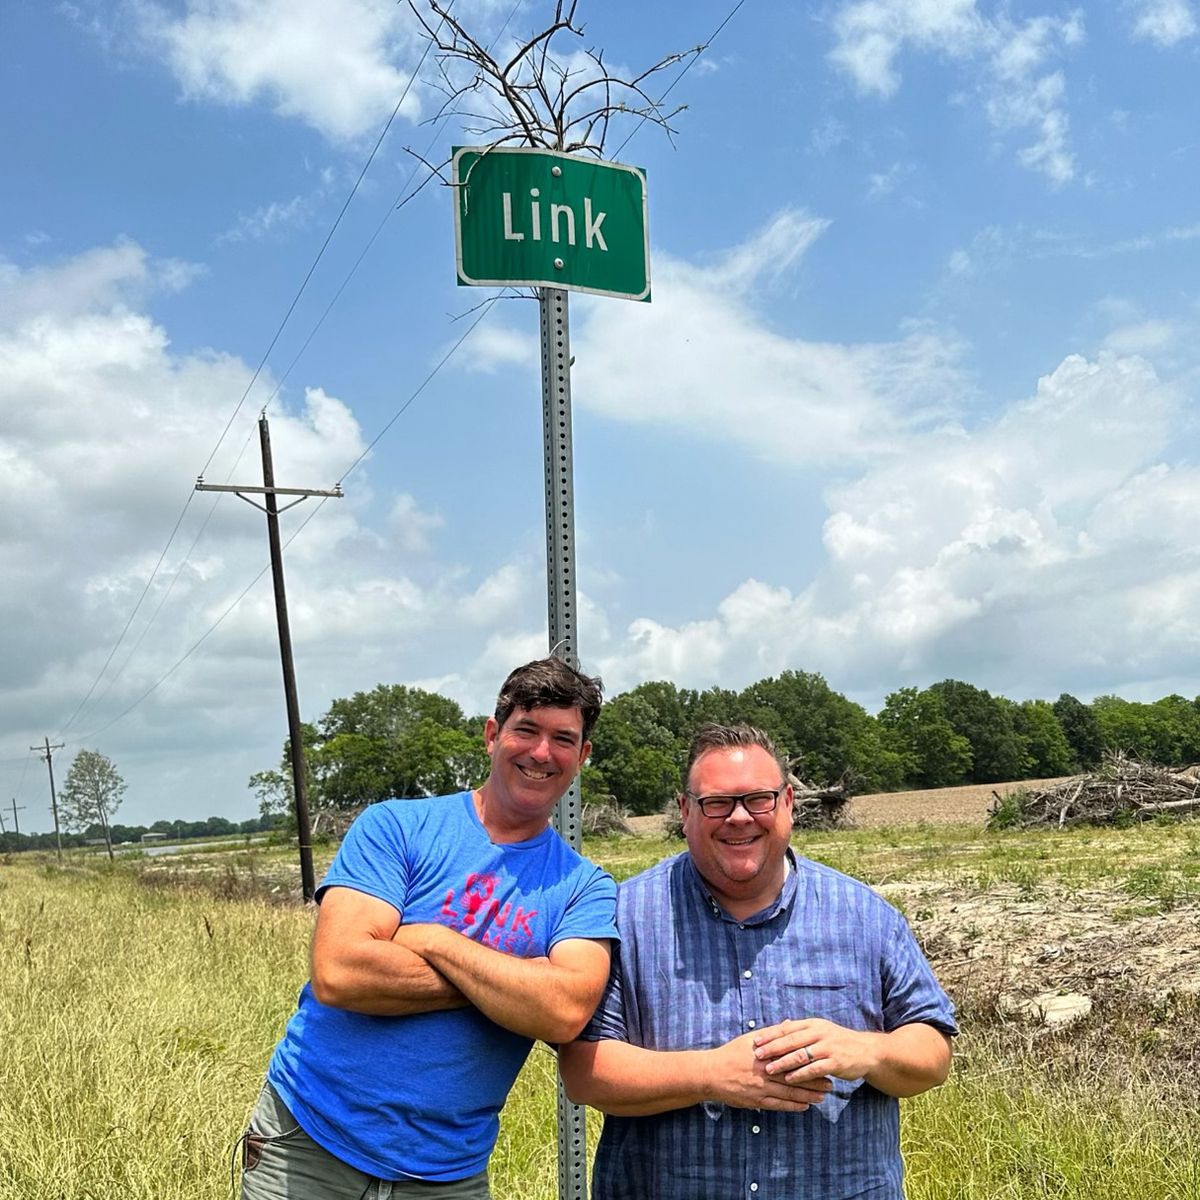 Chris Shepherd and a man stand in front of a sign that says Link in Louisiana while filming a segment for TV segment “Eat Like a Local.”